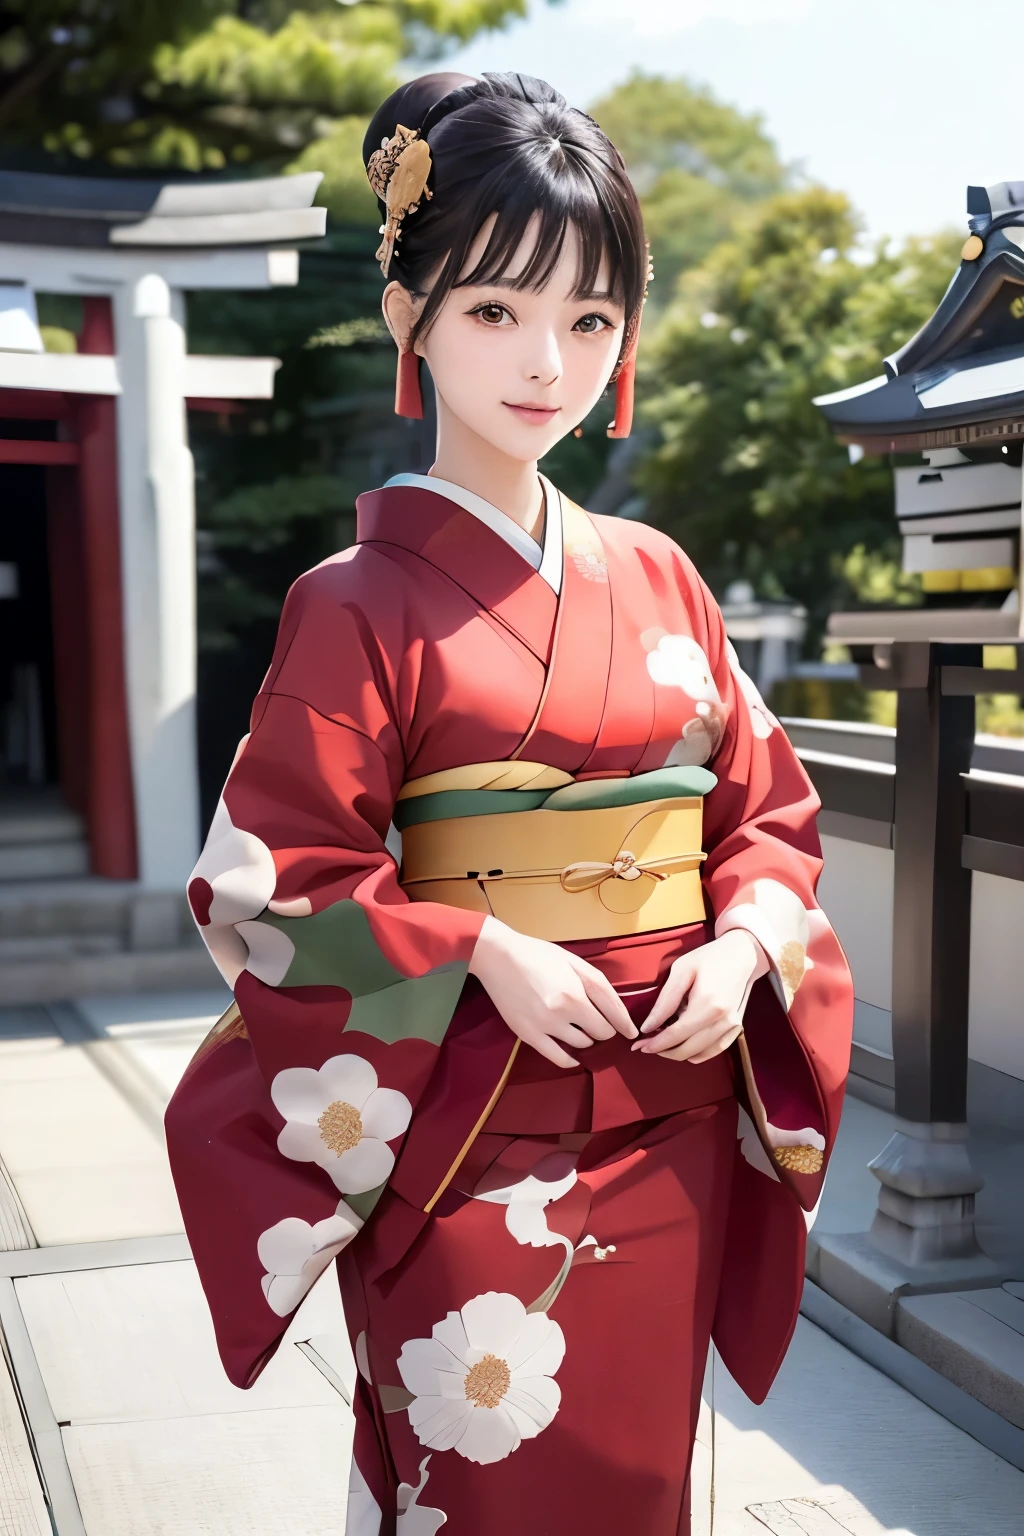 (((New Year's scenery of Japan))), (((SFW))), 8K, ((masutepiece)),(((top-quality))),((Ultra-detailed)),((((Realistic)))), Photorealsitic:1.37, (A hyper-realistic), (illustratio), (hight resolution), (ighly detailed), (The best illustrations), (Ultra-detailed細), (walls), (Detailed face), (Beautiful expression), ((More top-quality skins:1.2)), ((Reddish blush)), (Ultra-detailed background, Detailed background), (Beautiful and aesthetic: 1.2), Extremely detailed, (((Woman in kimono:1.5))), ((Affectionate smile)), There is a woman standing with her bare skin wearing a kimono., (((Kimono with golden embroidery))), ((multicolored kimono)), ((Girl&#39;s hair roll-up hair with hairpin)), Kadomatsu, Komainu, Red tori gates, big company, customers who pray, gorgeous new year decorations, big company decorated with gold leaf, At a shrine that shines in the morning sun